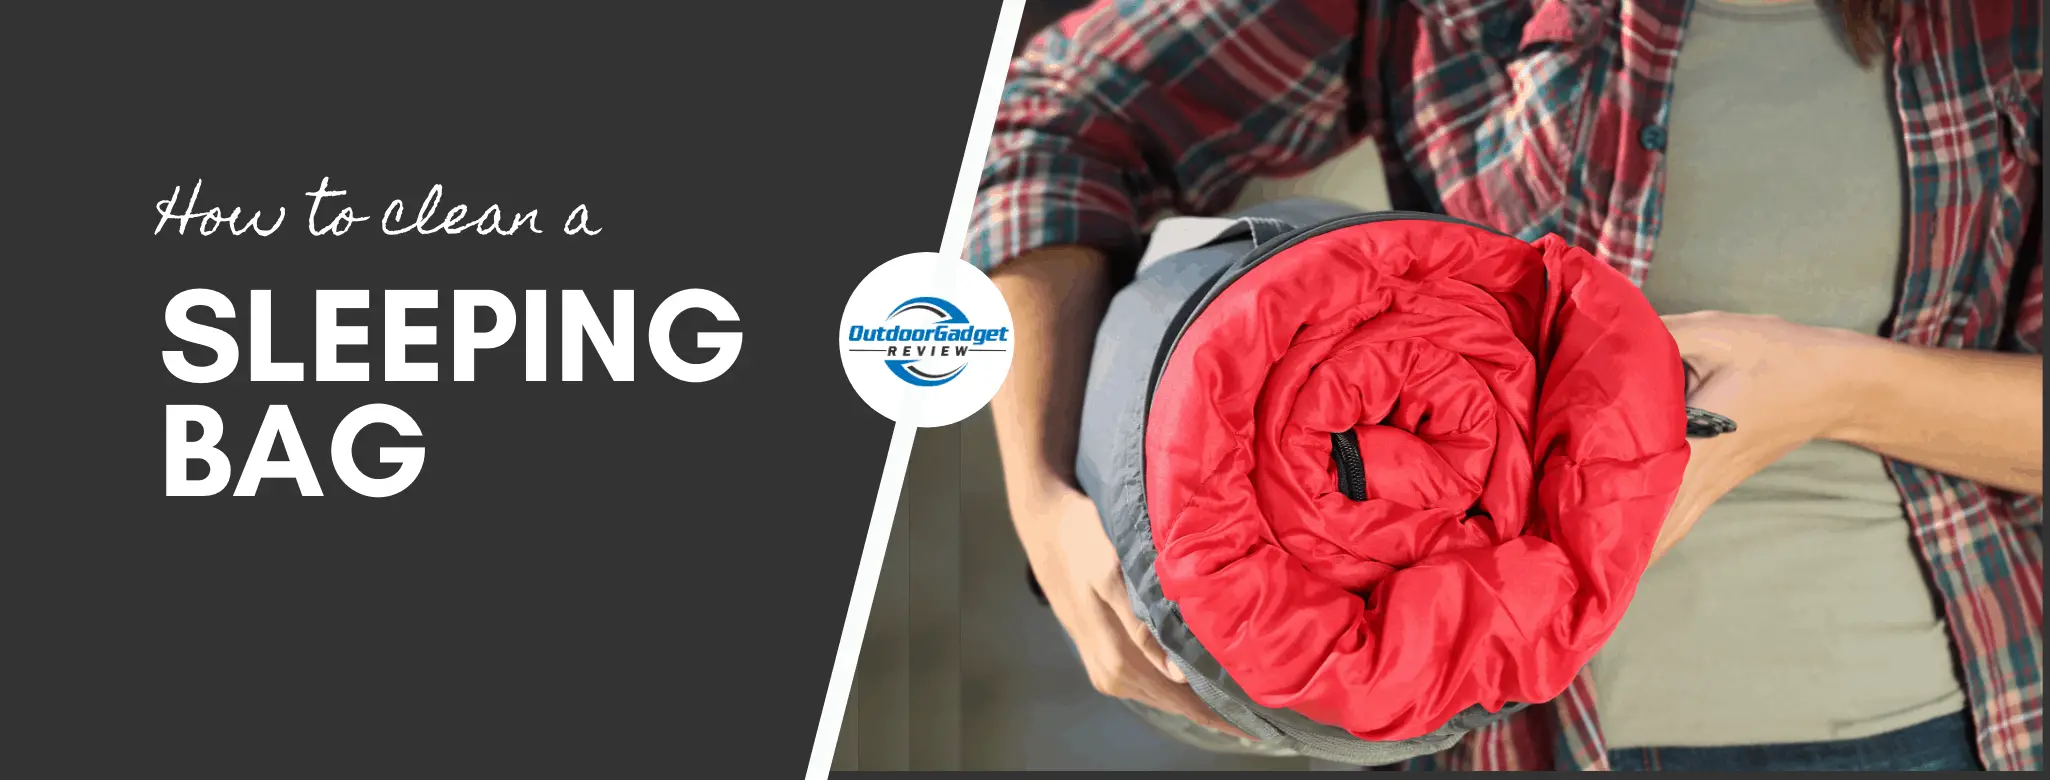 How to clean a sleeping bag